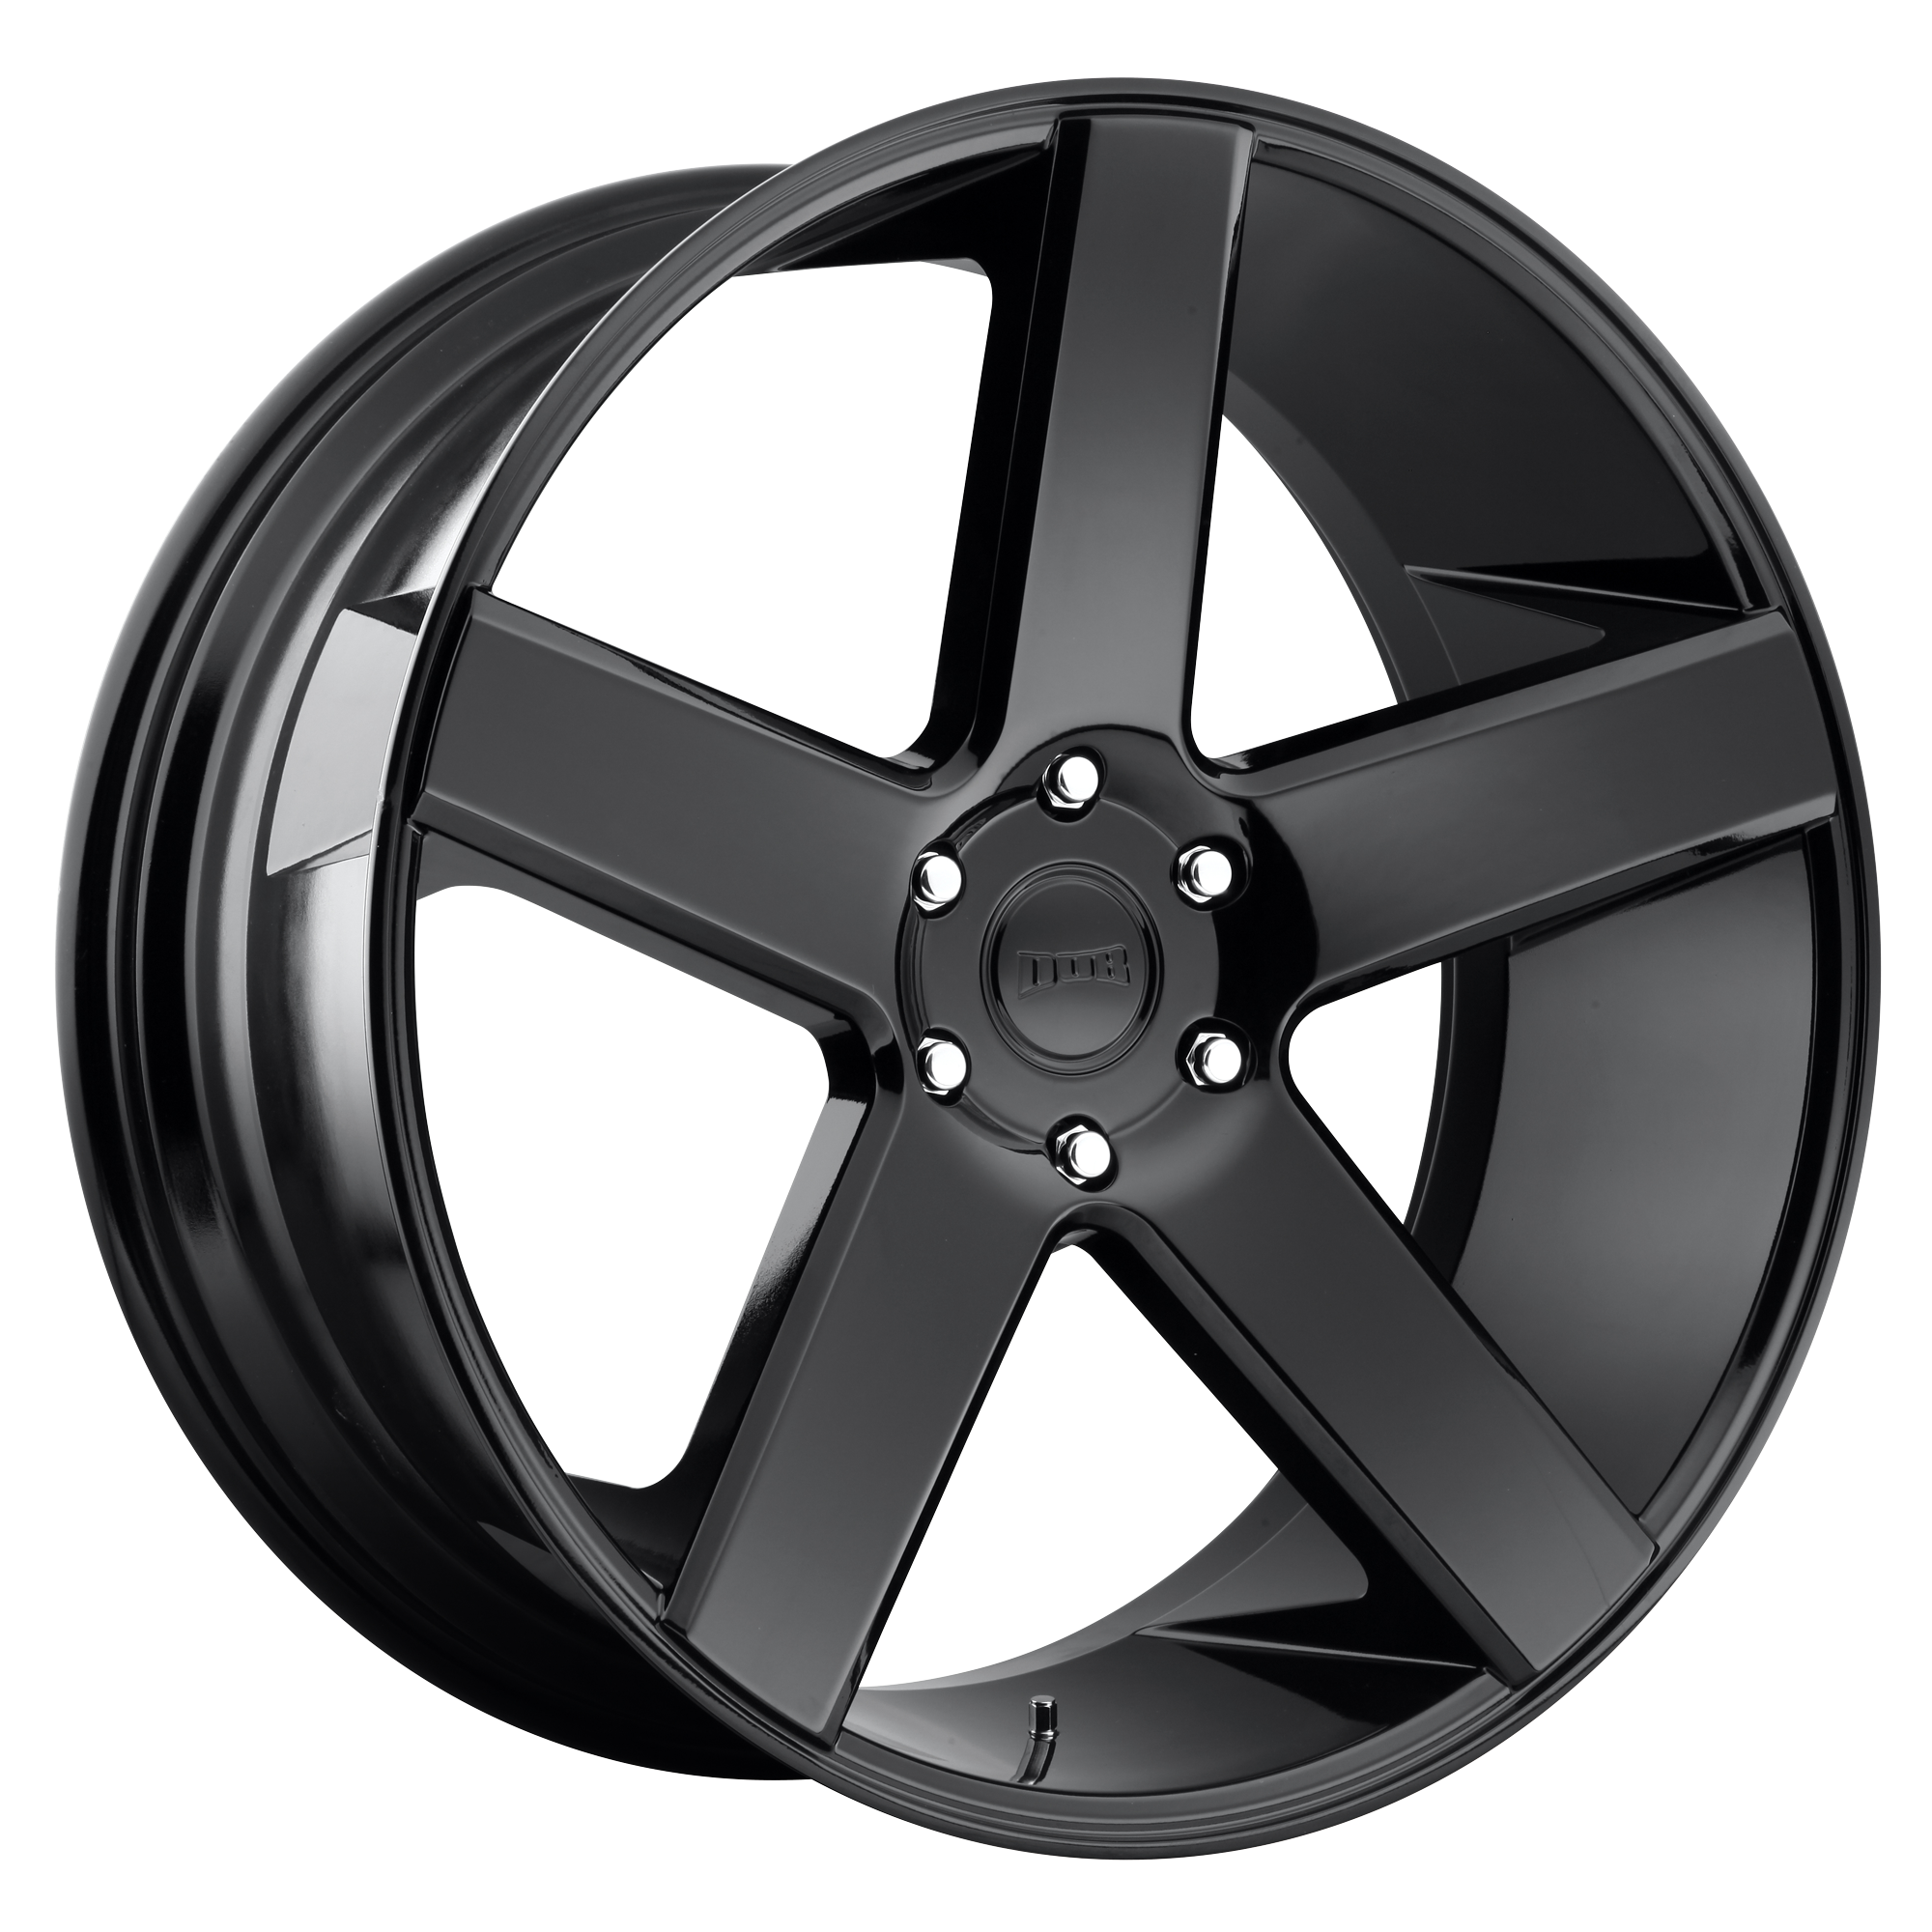 BALLER 24x9 5x120.00 GLOSS BLACK (15 mm) - Tires and Engine Performance